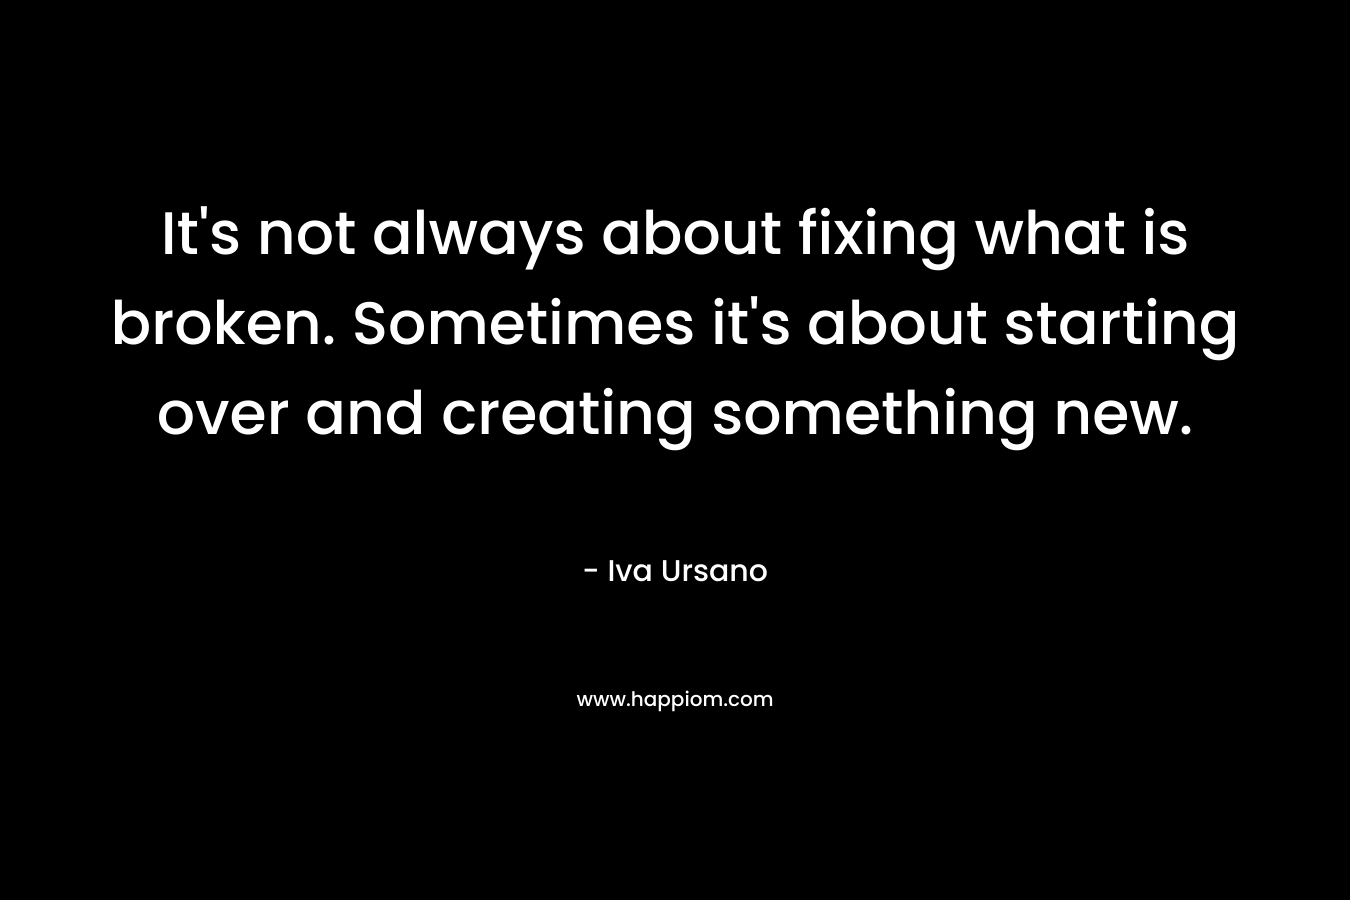 It’s not always about fixing what is broken. Sometimes it’s about starting over and creating something new. – Iva Ursano